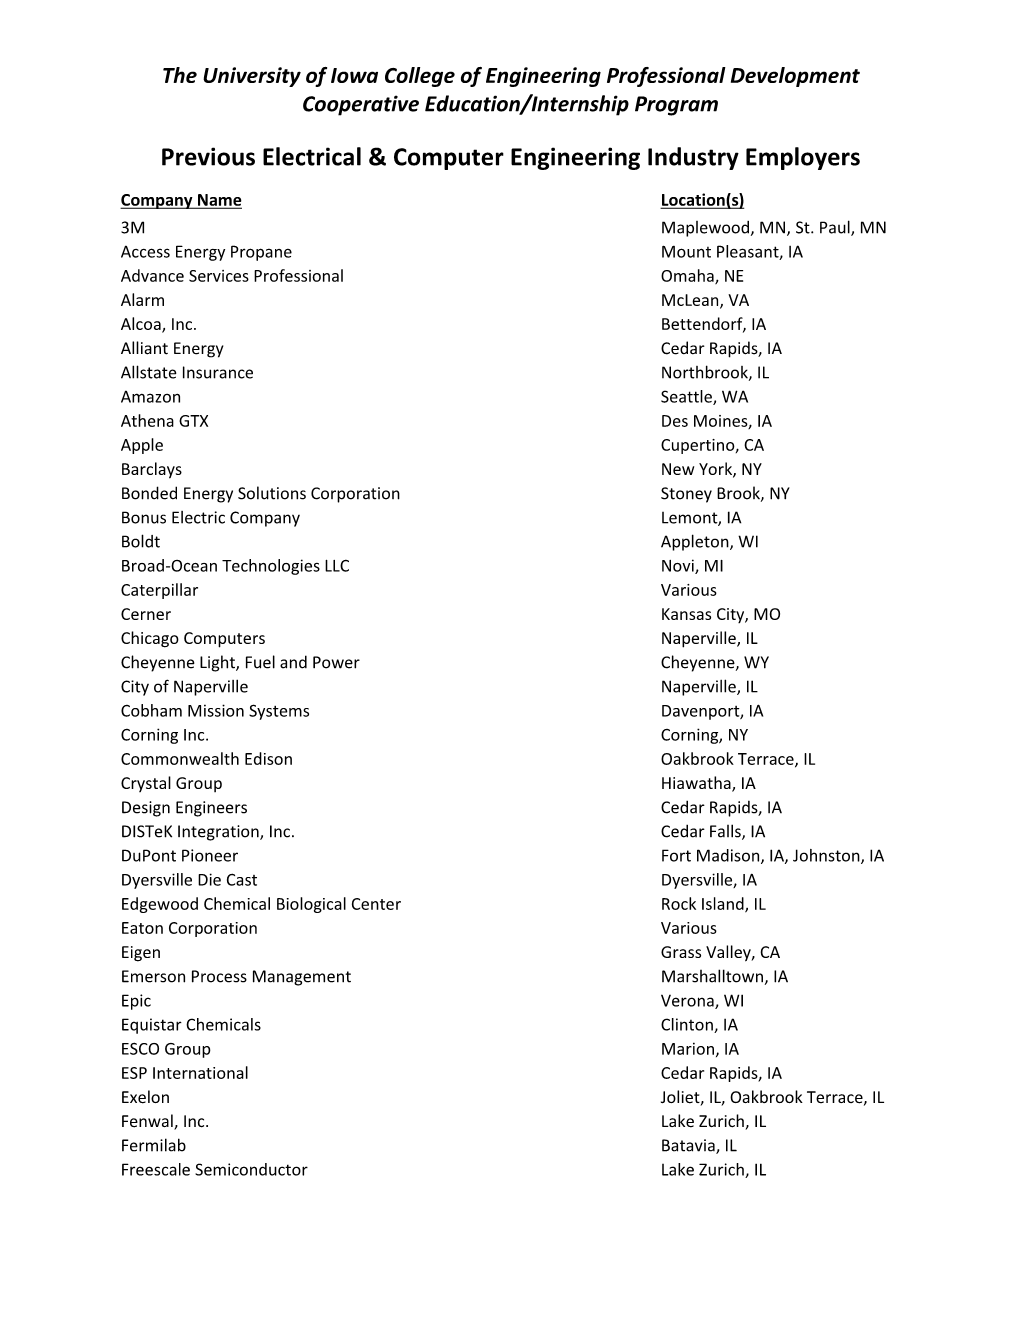 Previous Electrical & Computer Engineering Industry Employers